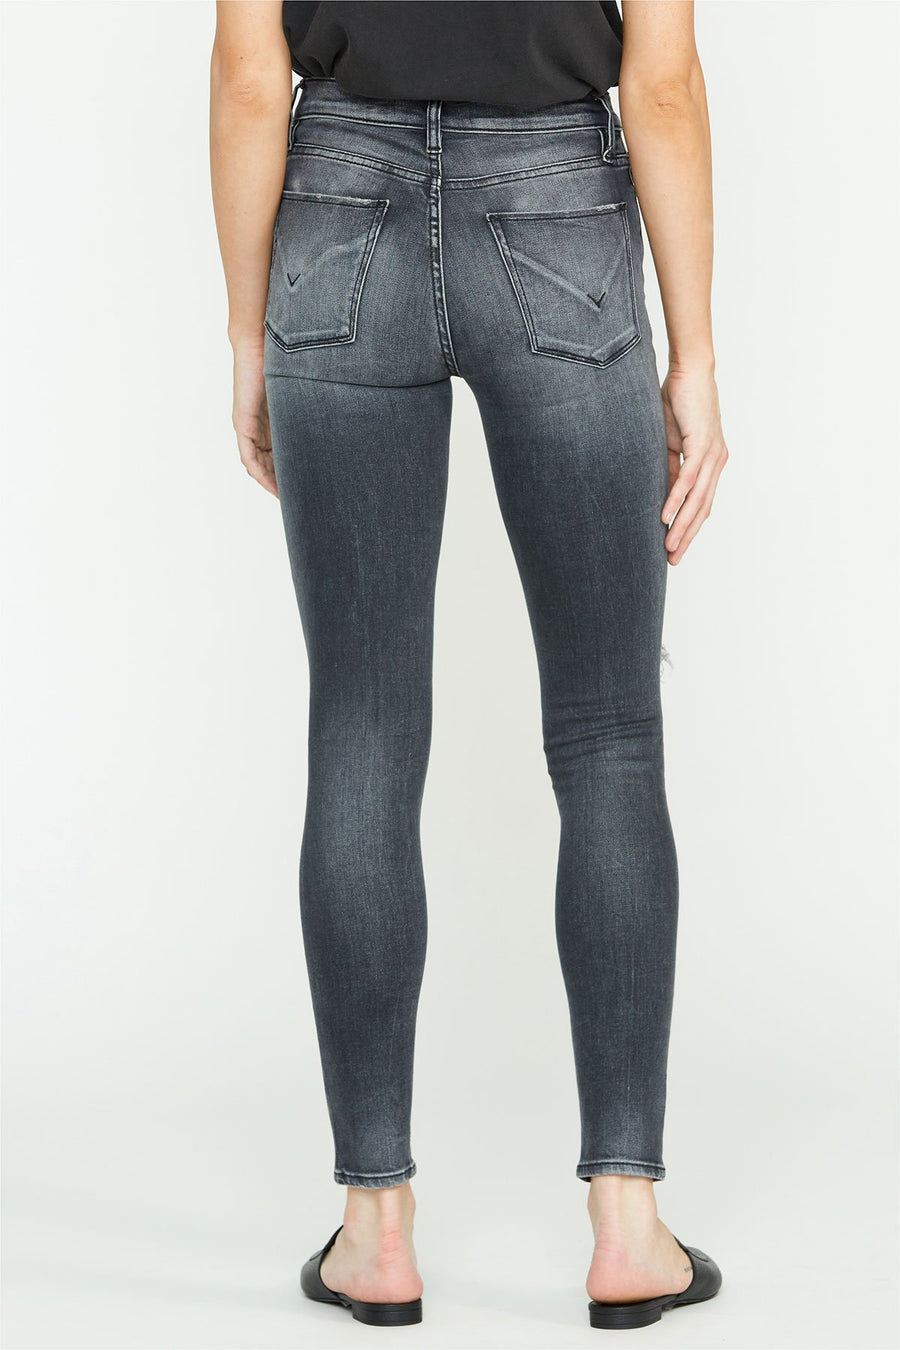 HUDSON JEANS Barbara High Rise in Out of Sight